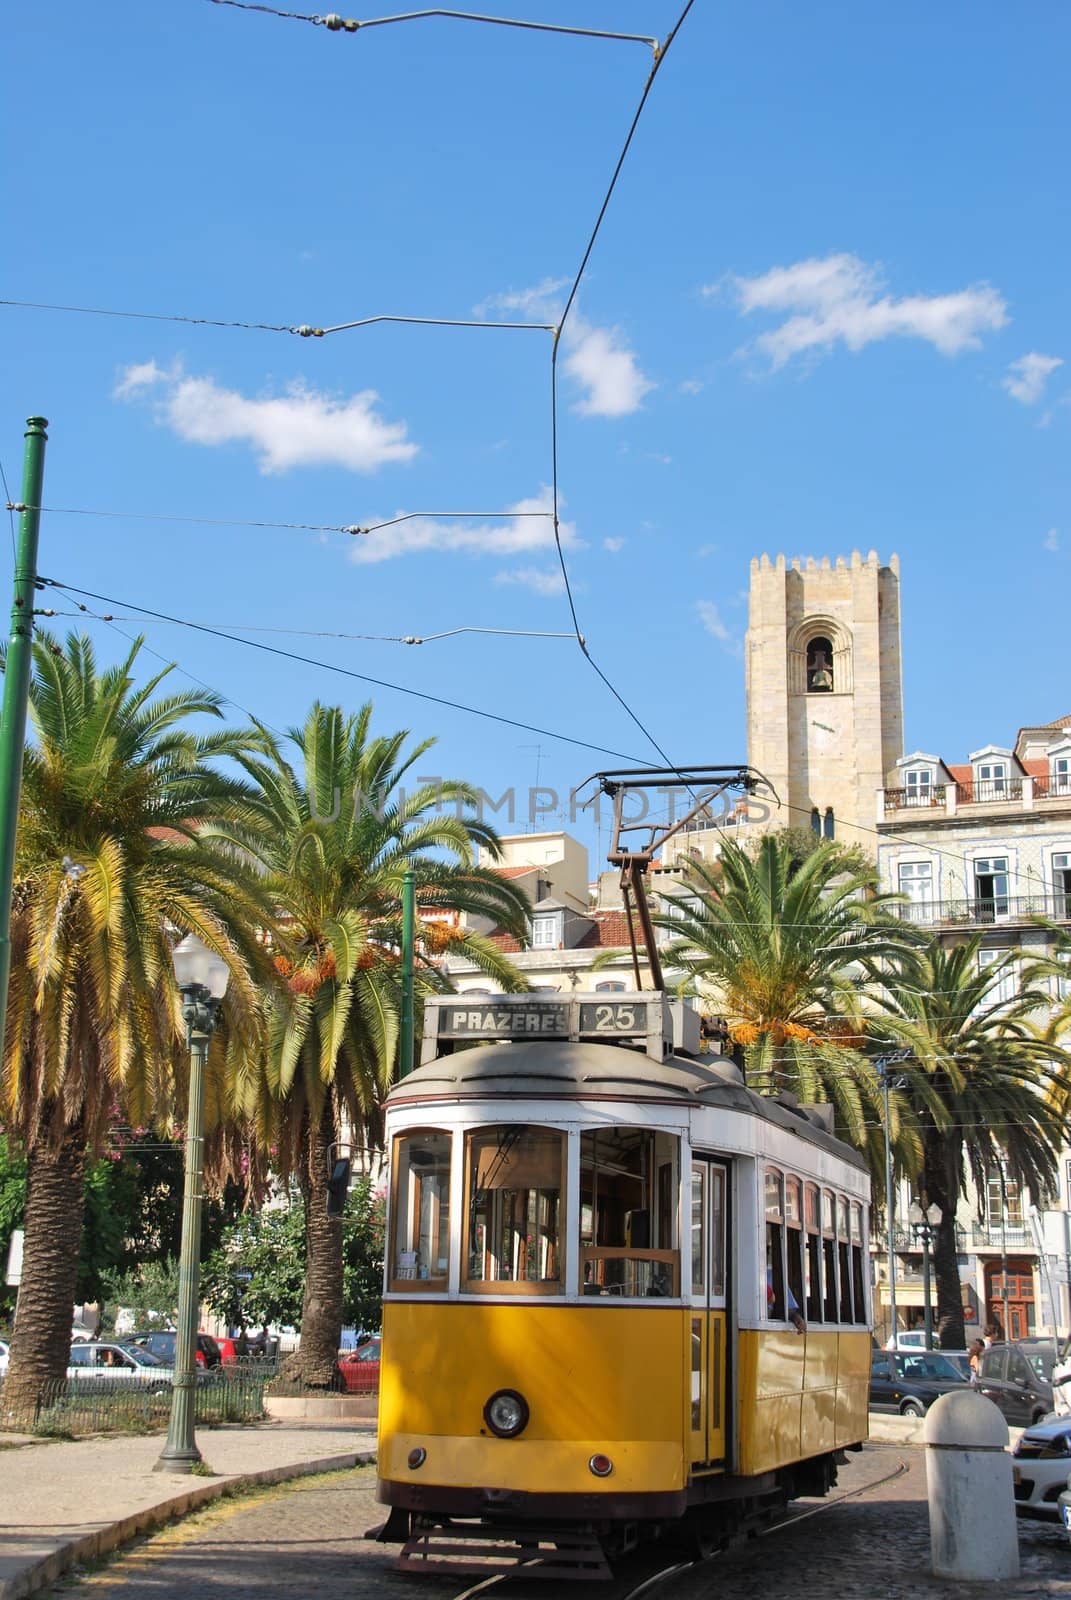 beautiful city sight of the capital of Portugal with yellow typical tram, Lisbon